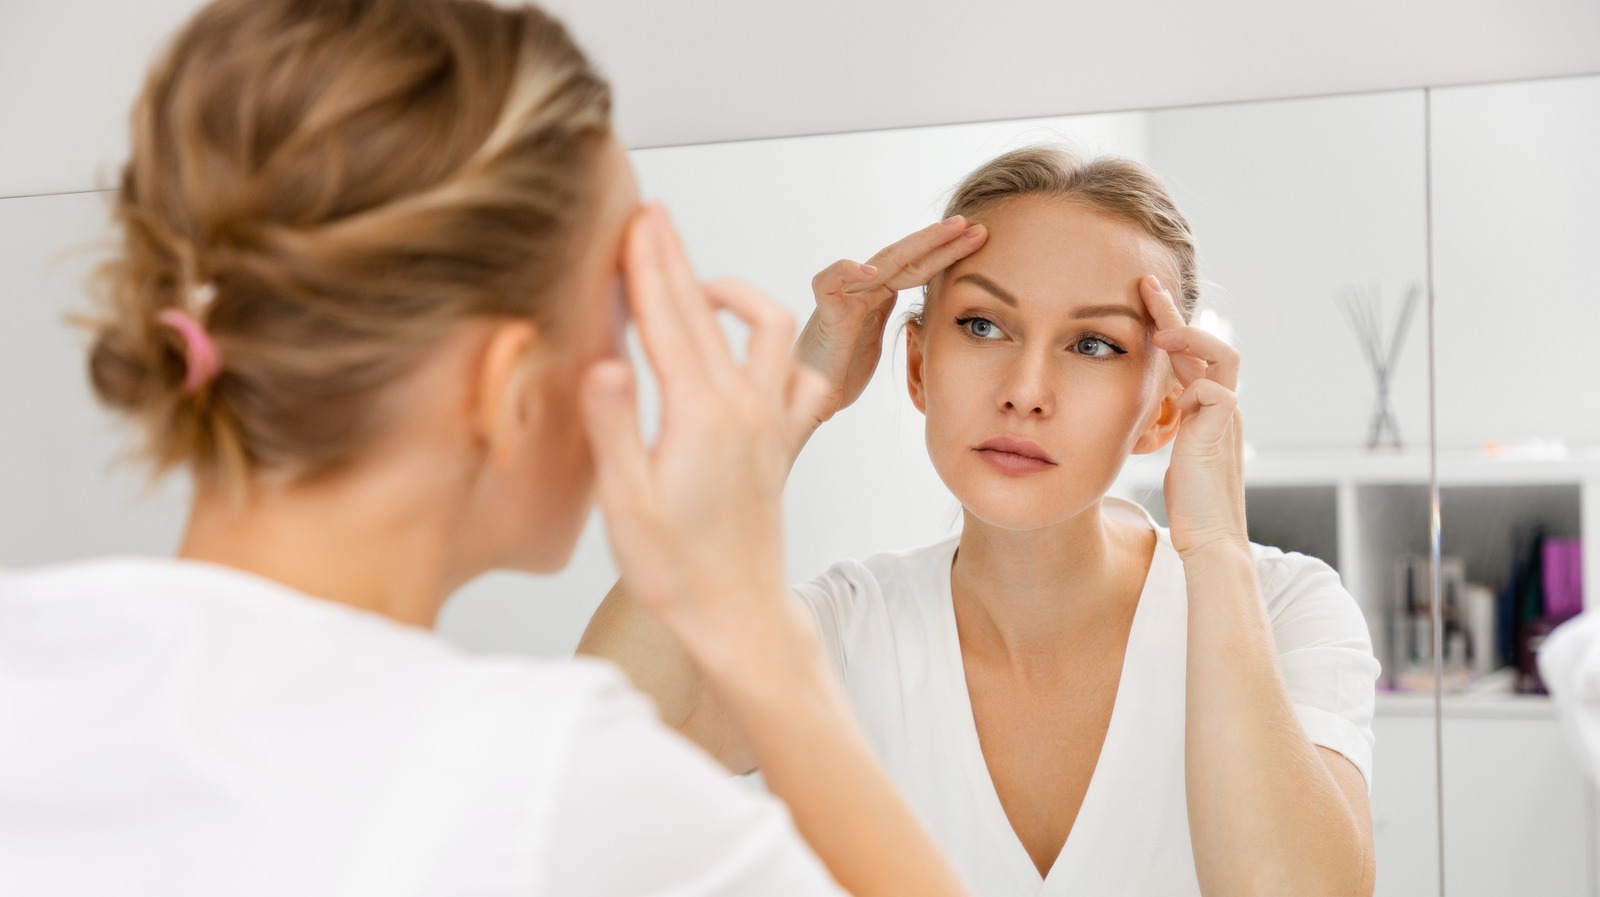 These Makeup Tips Will Help To Shrink A Big Forehead